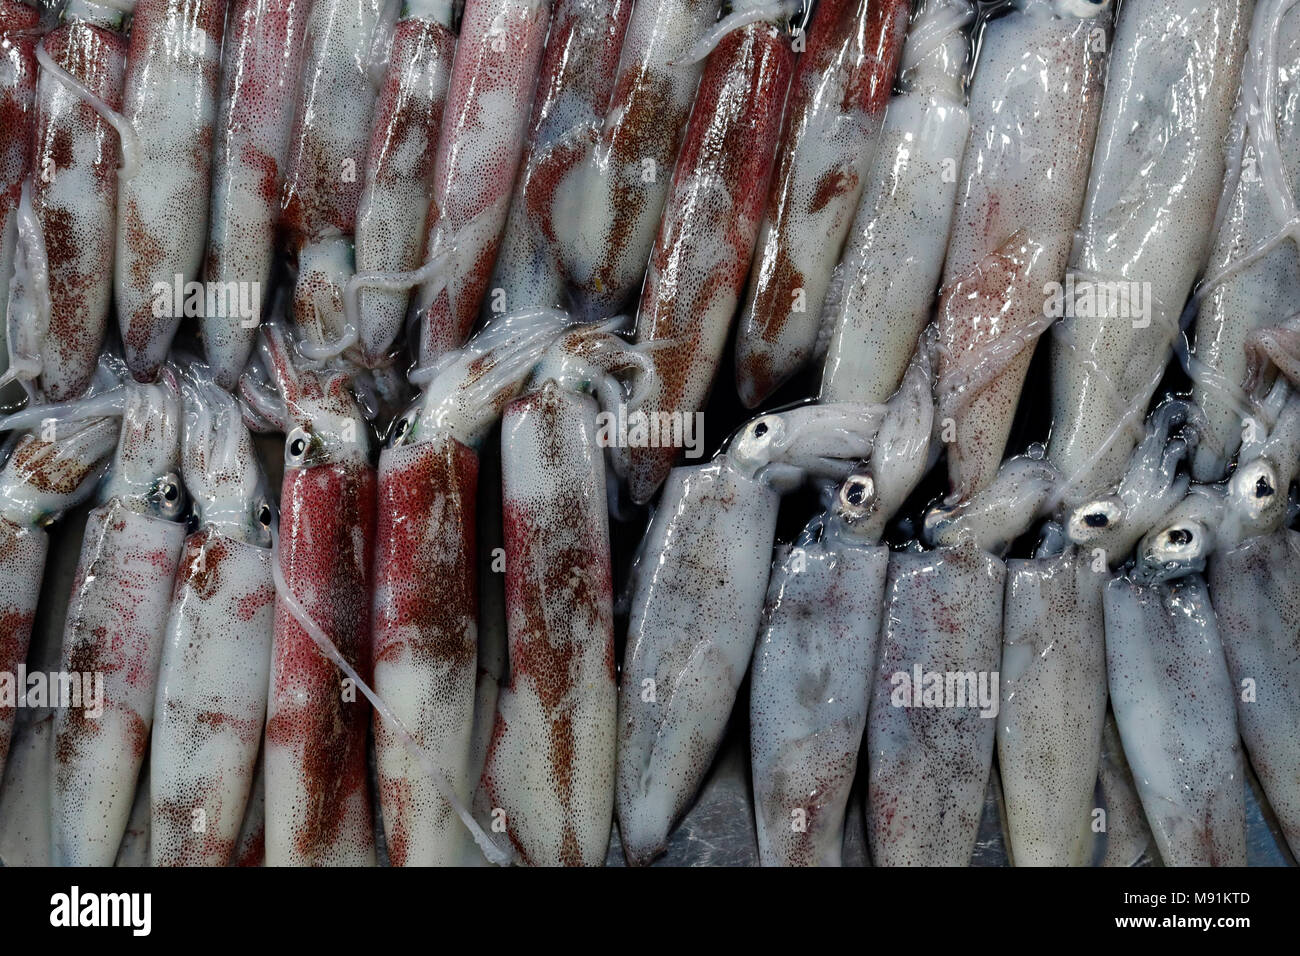 Seafood restaurant in Duong Dong town.  Squids.  Phu Quoc. Vietnam. Stock Photo